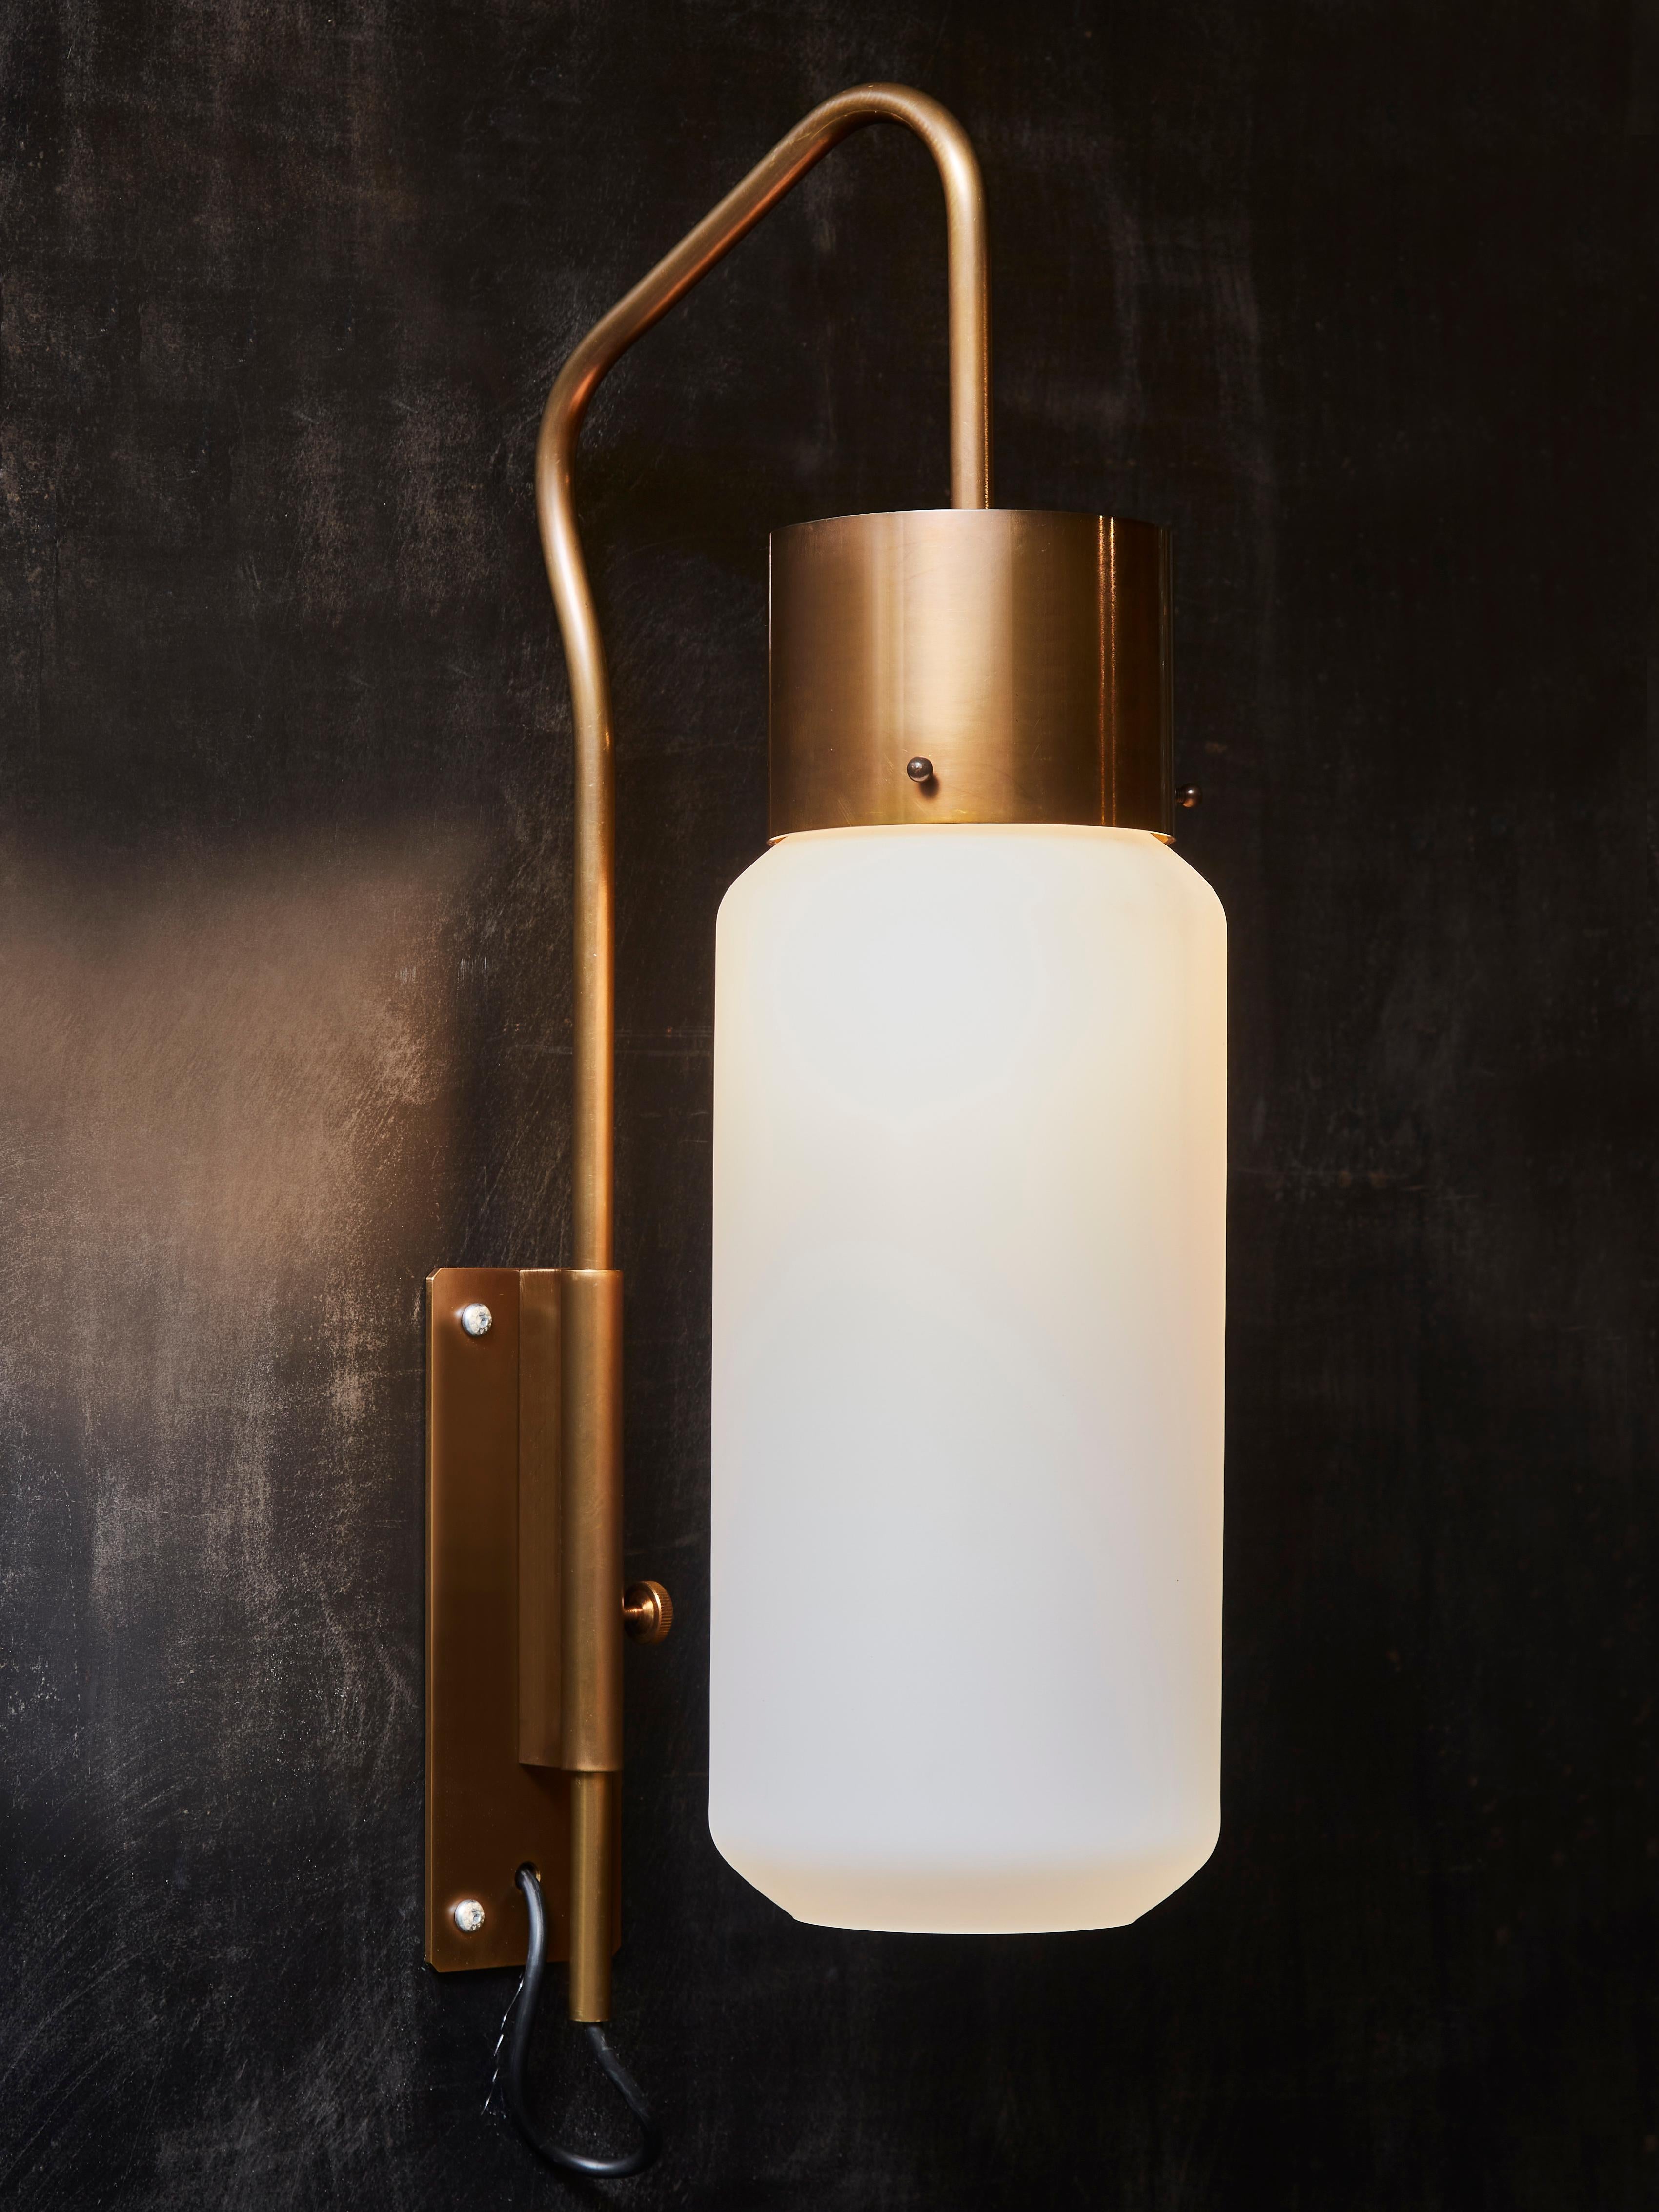 Pair of brass wall sconces with opaline glass and adjustable arm.